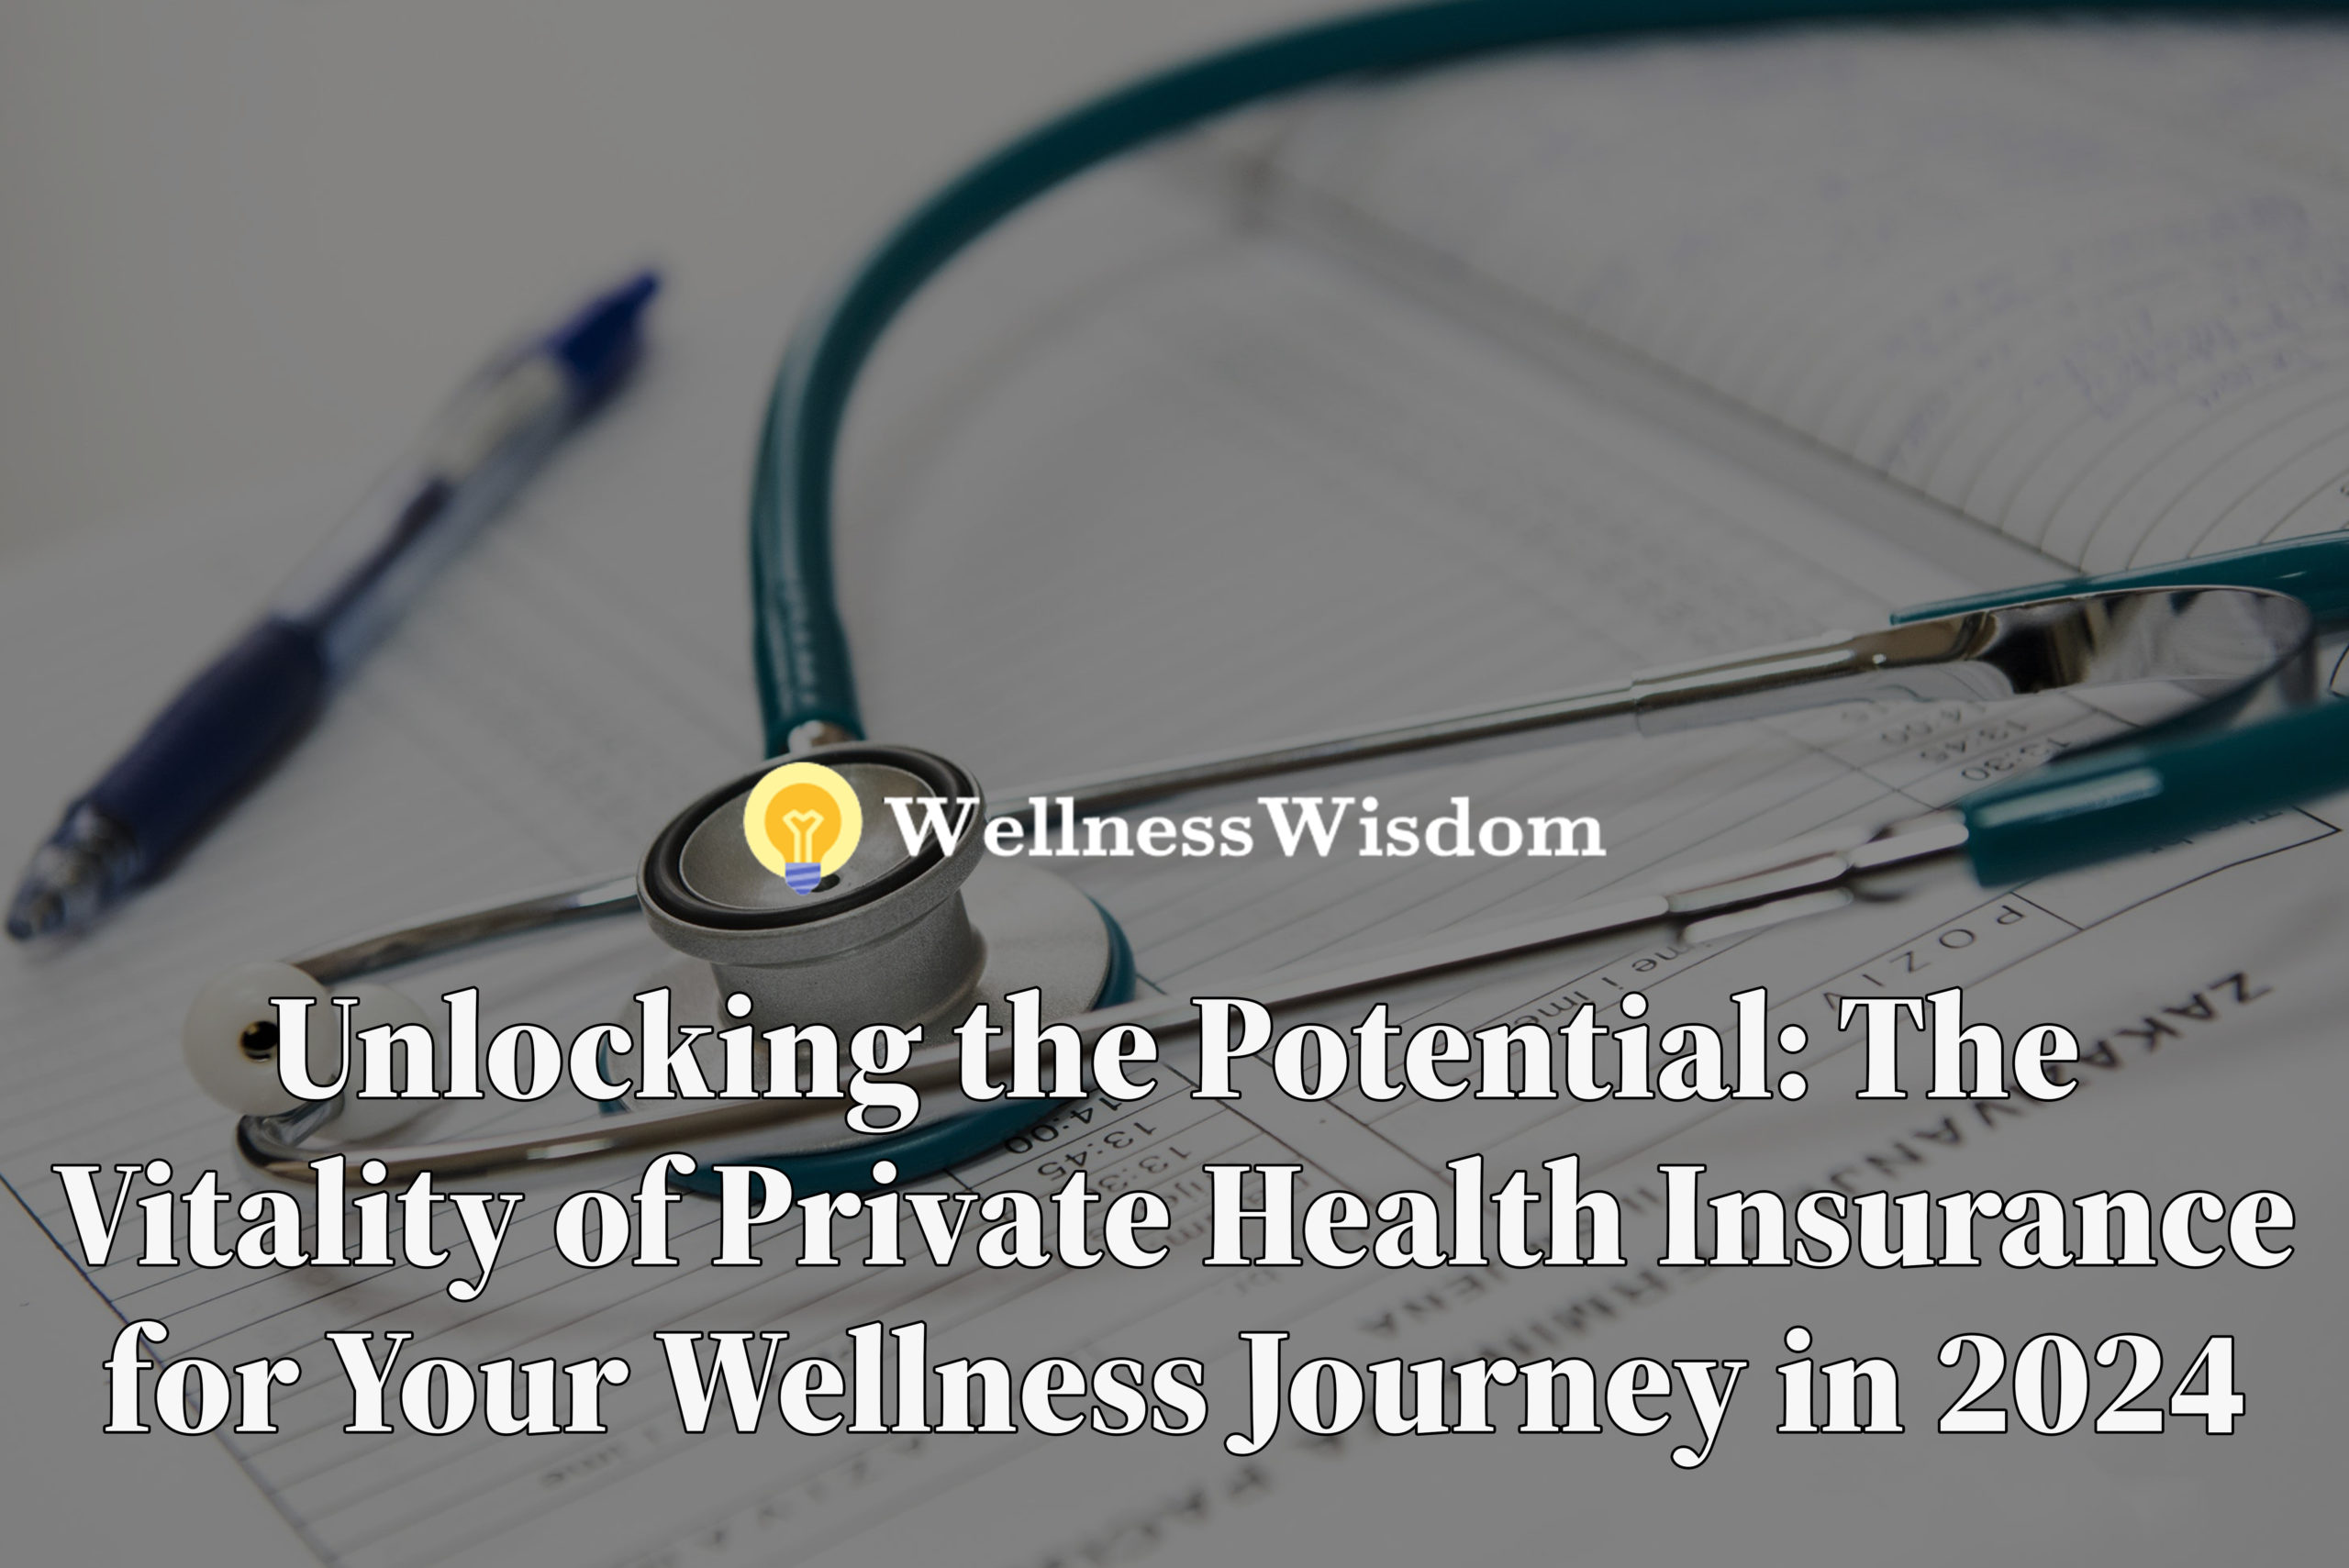 Private health insurance, Healthcare coverage, Wellness journey, Healthcare flexibility, Medical choices, Comprehensive insurance, Peace of mind, Timely care, Personalized healthcare, Health assurance, Healthcare access, Health investment, Healthcare options, Healthcare empowerment, Preventive care.